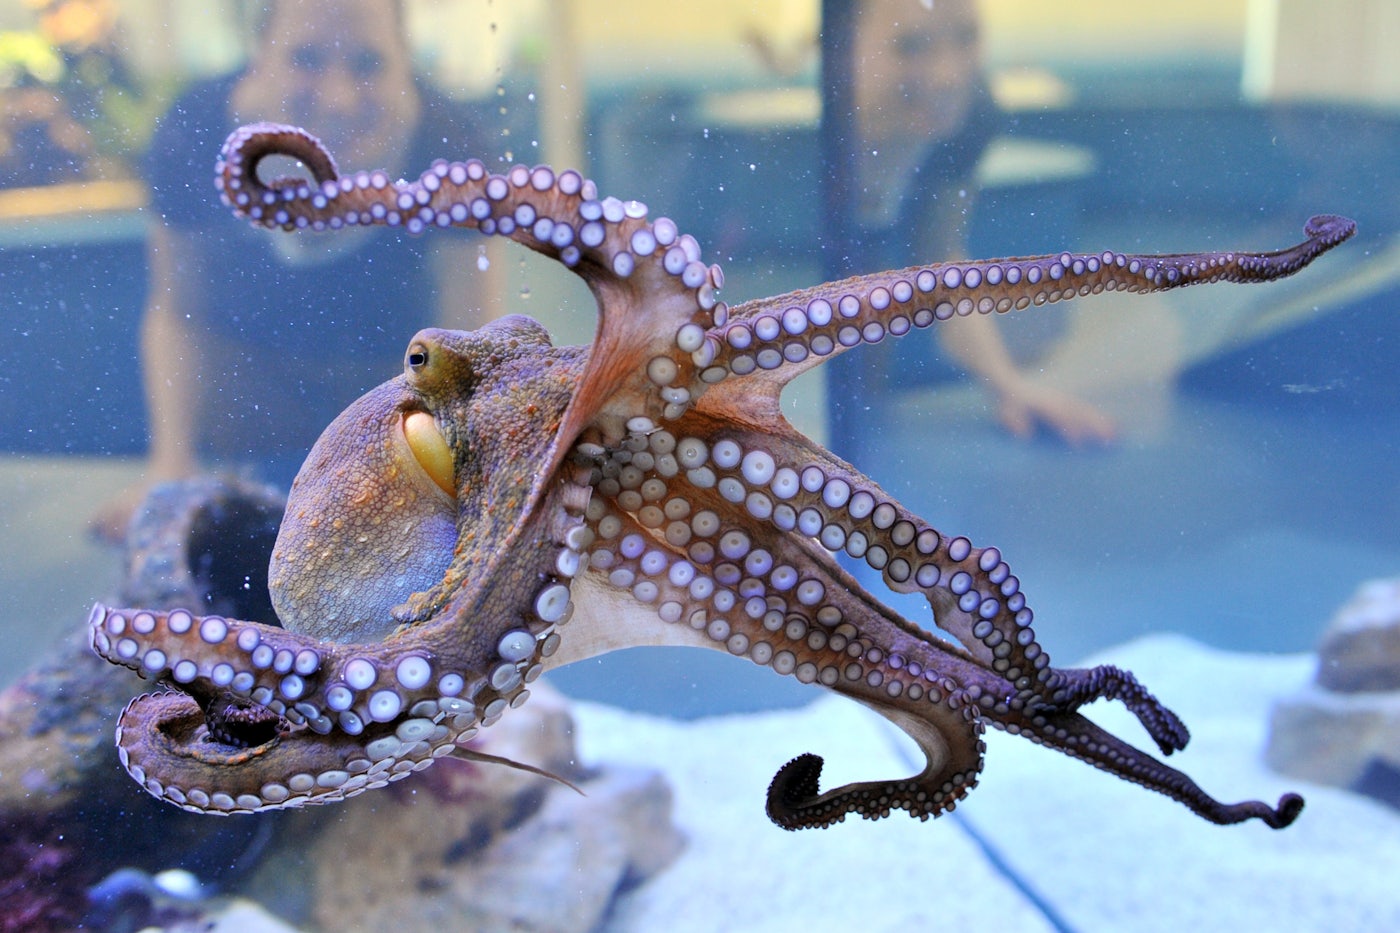 Octopuses Are Smart, But Are They Conscious? | The New Republic